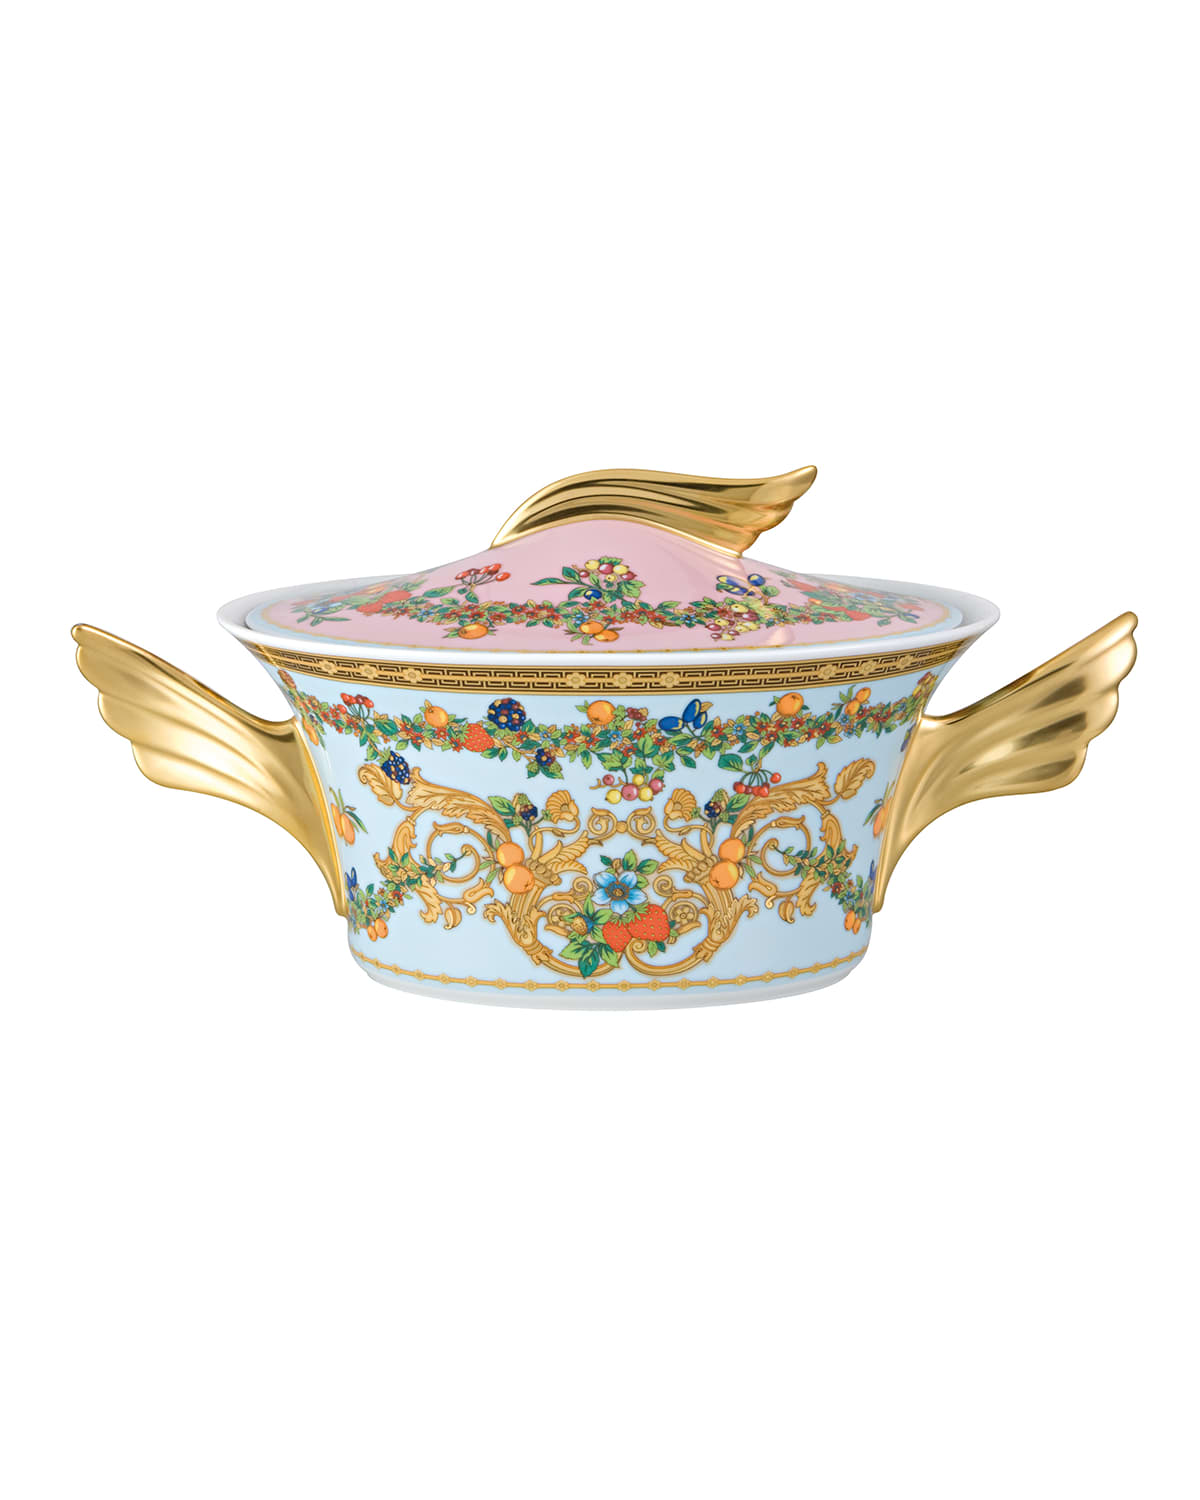 Butterfly Garden Covered Vegetable Dish